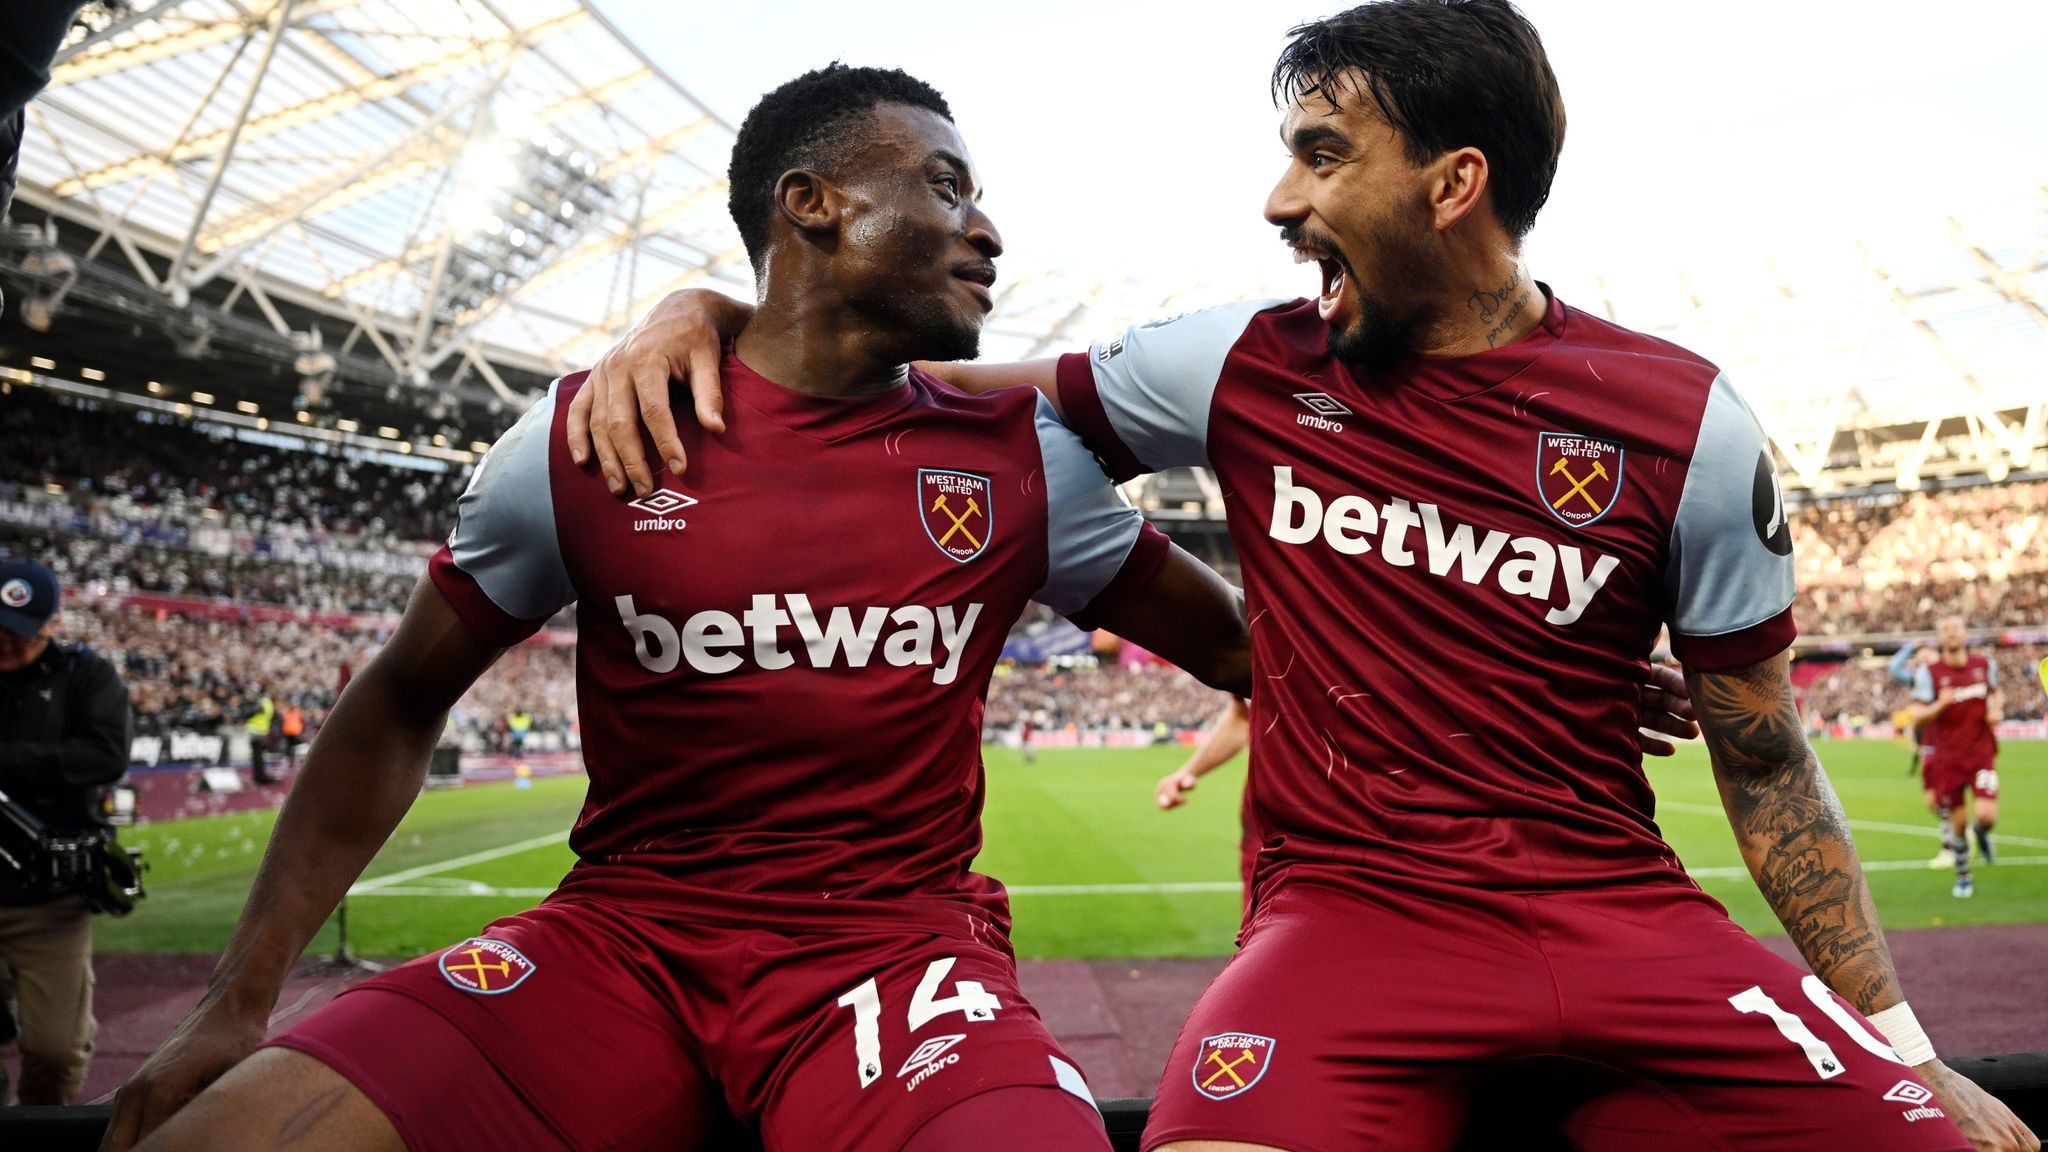 West Ham 3-0 Wolves highlights discussed